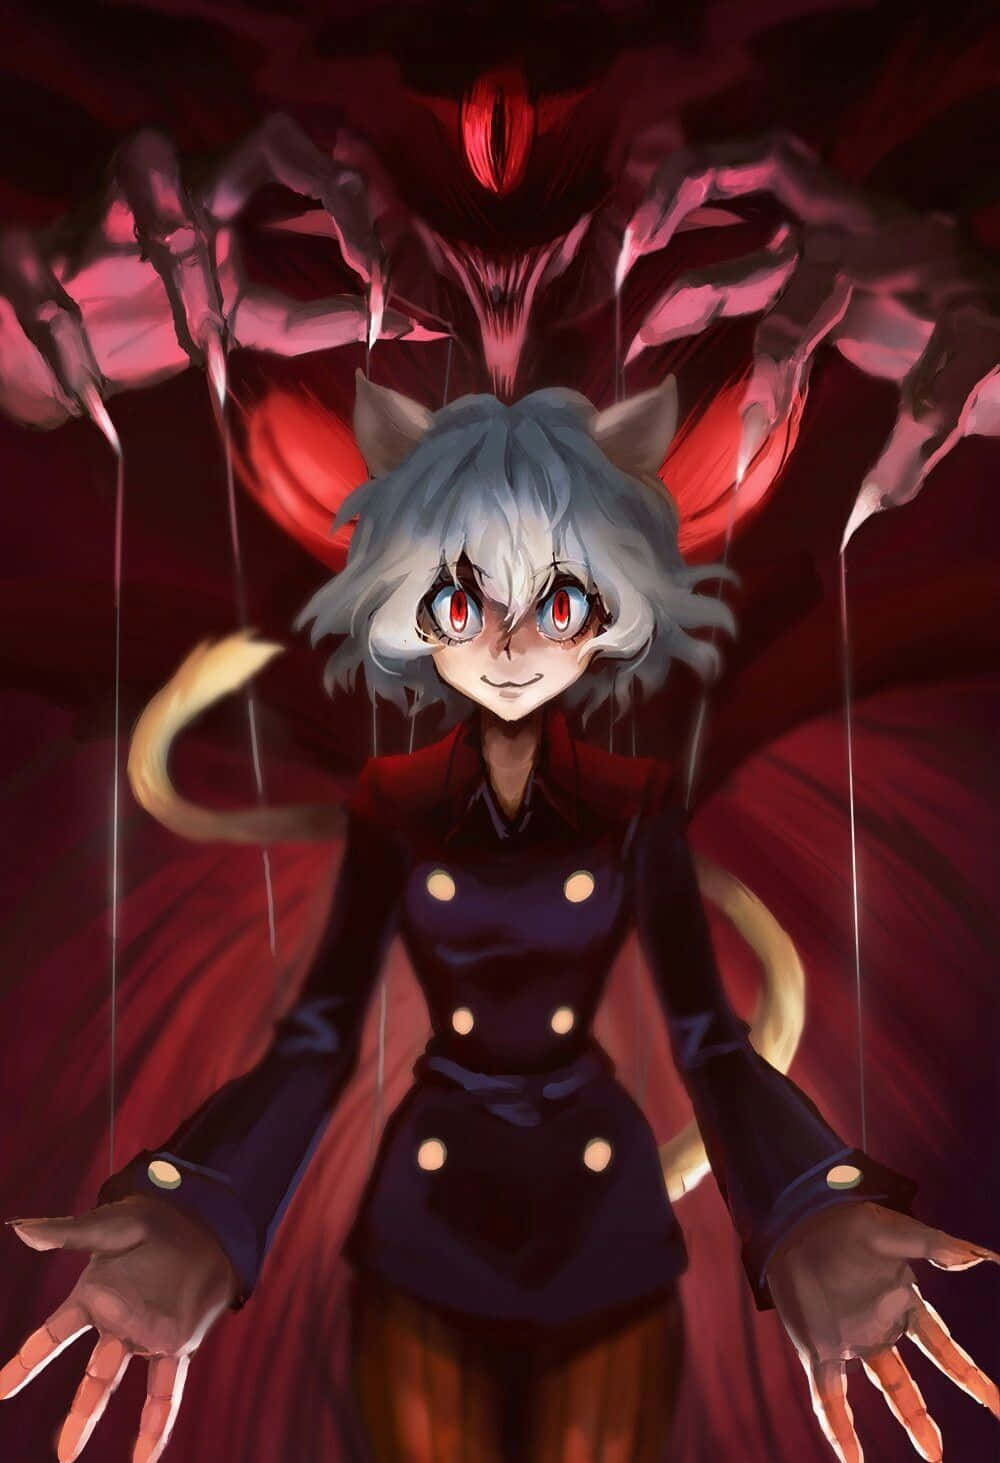 Neferpitou - The Iconic Royal Guard of the Chimera Ant Wallpaper